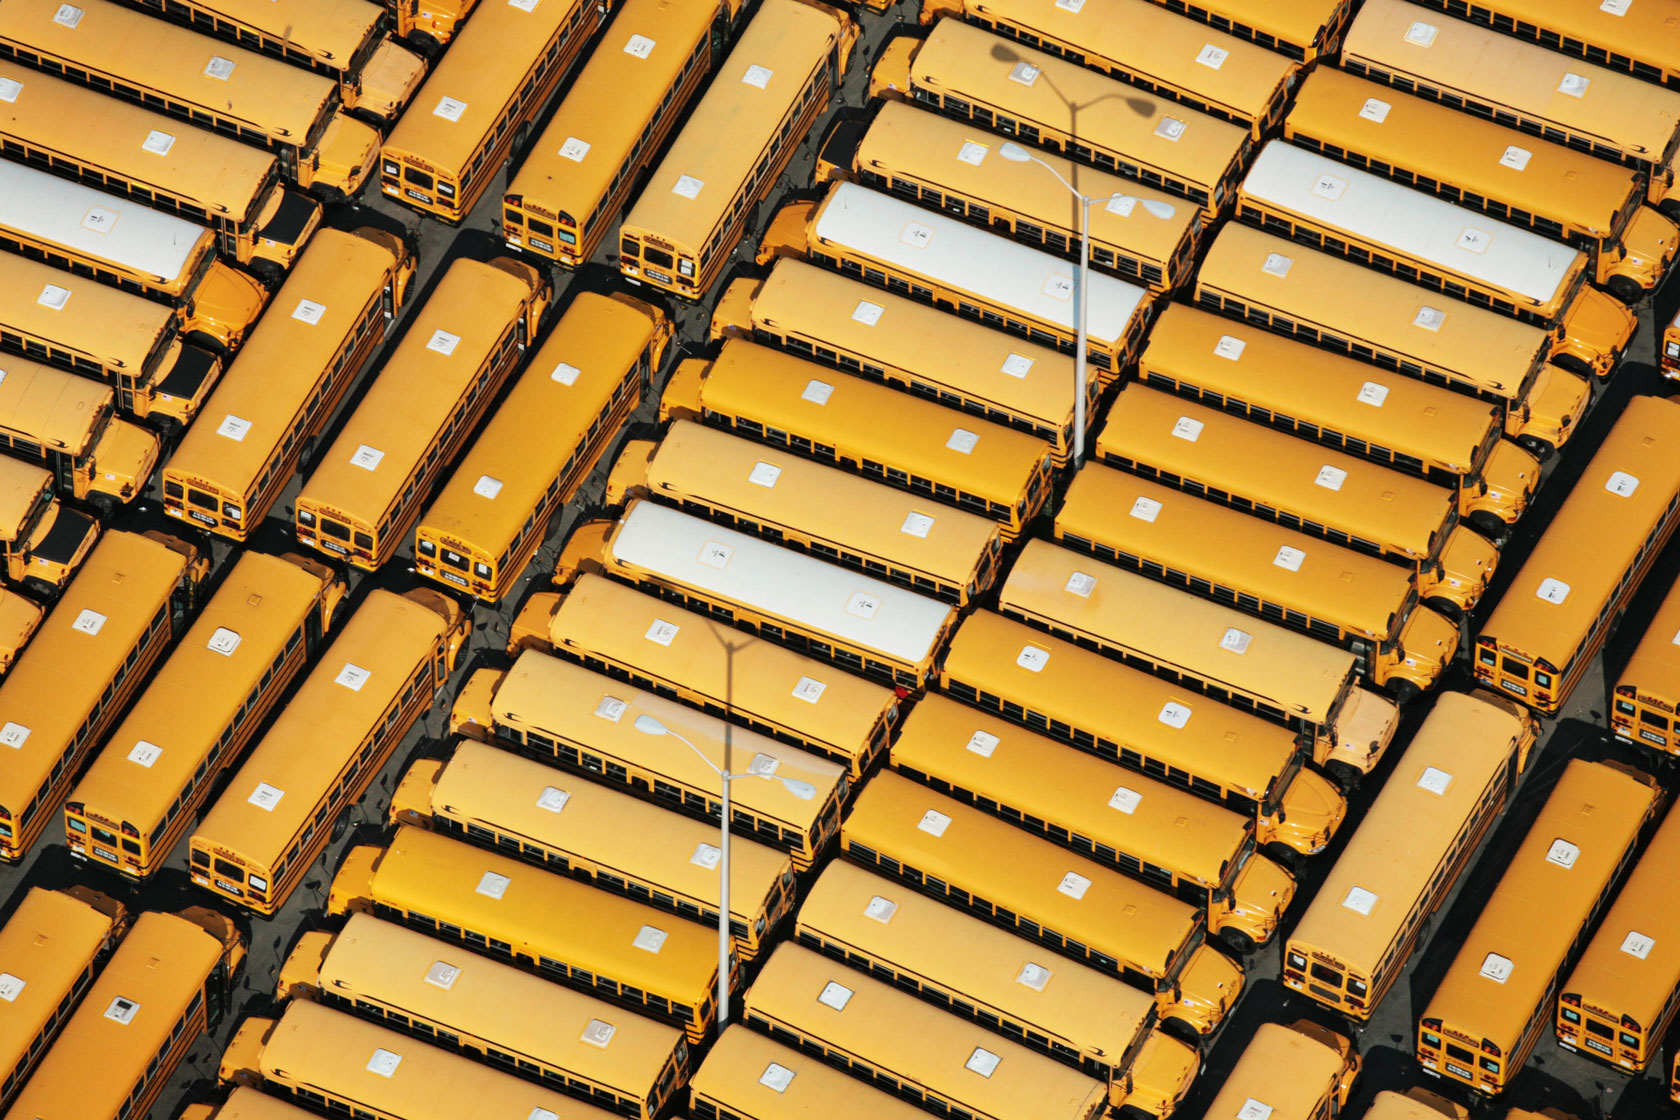 Lines of school buses are pictured in a lot.